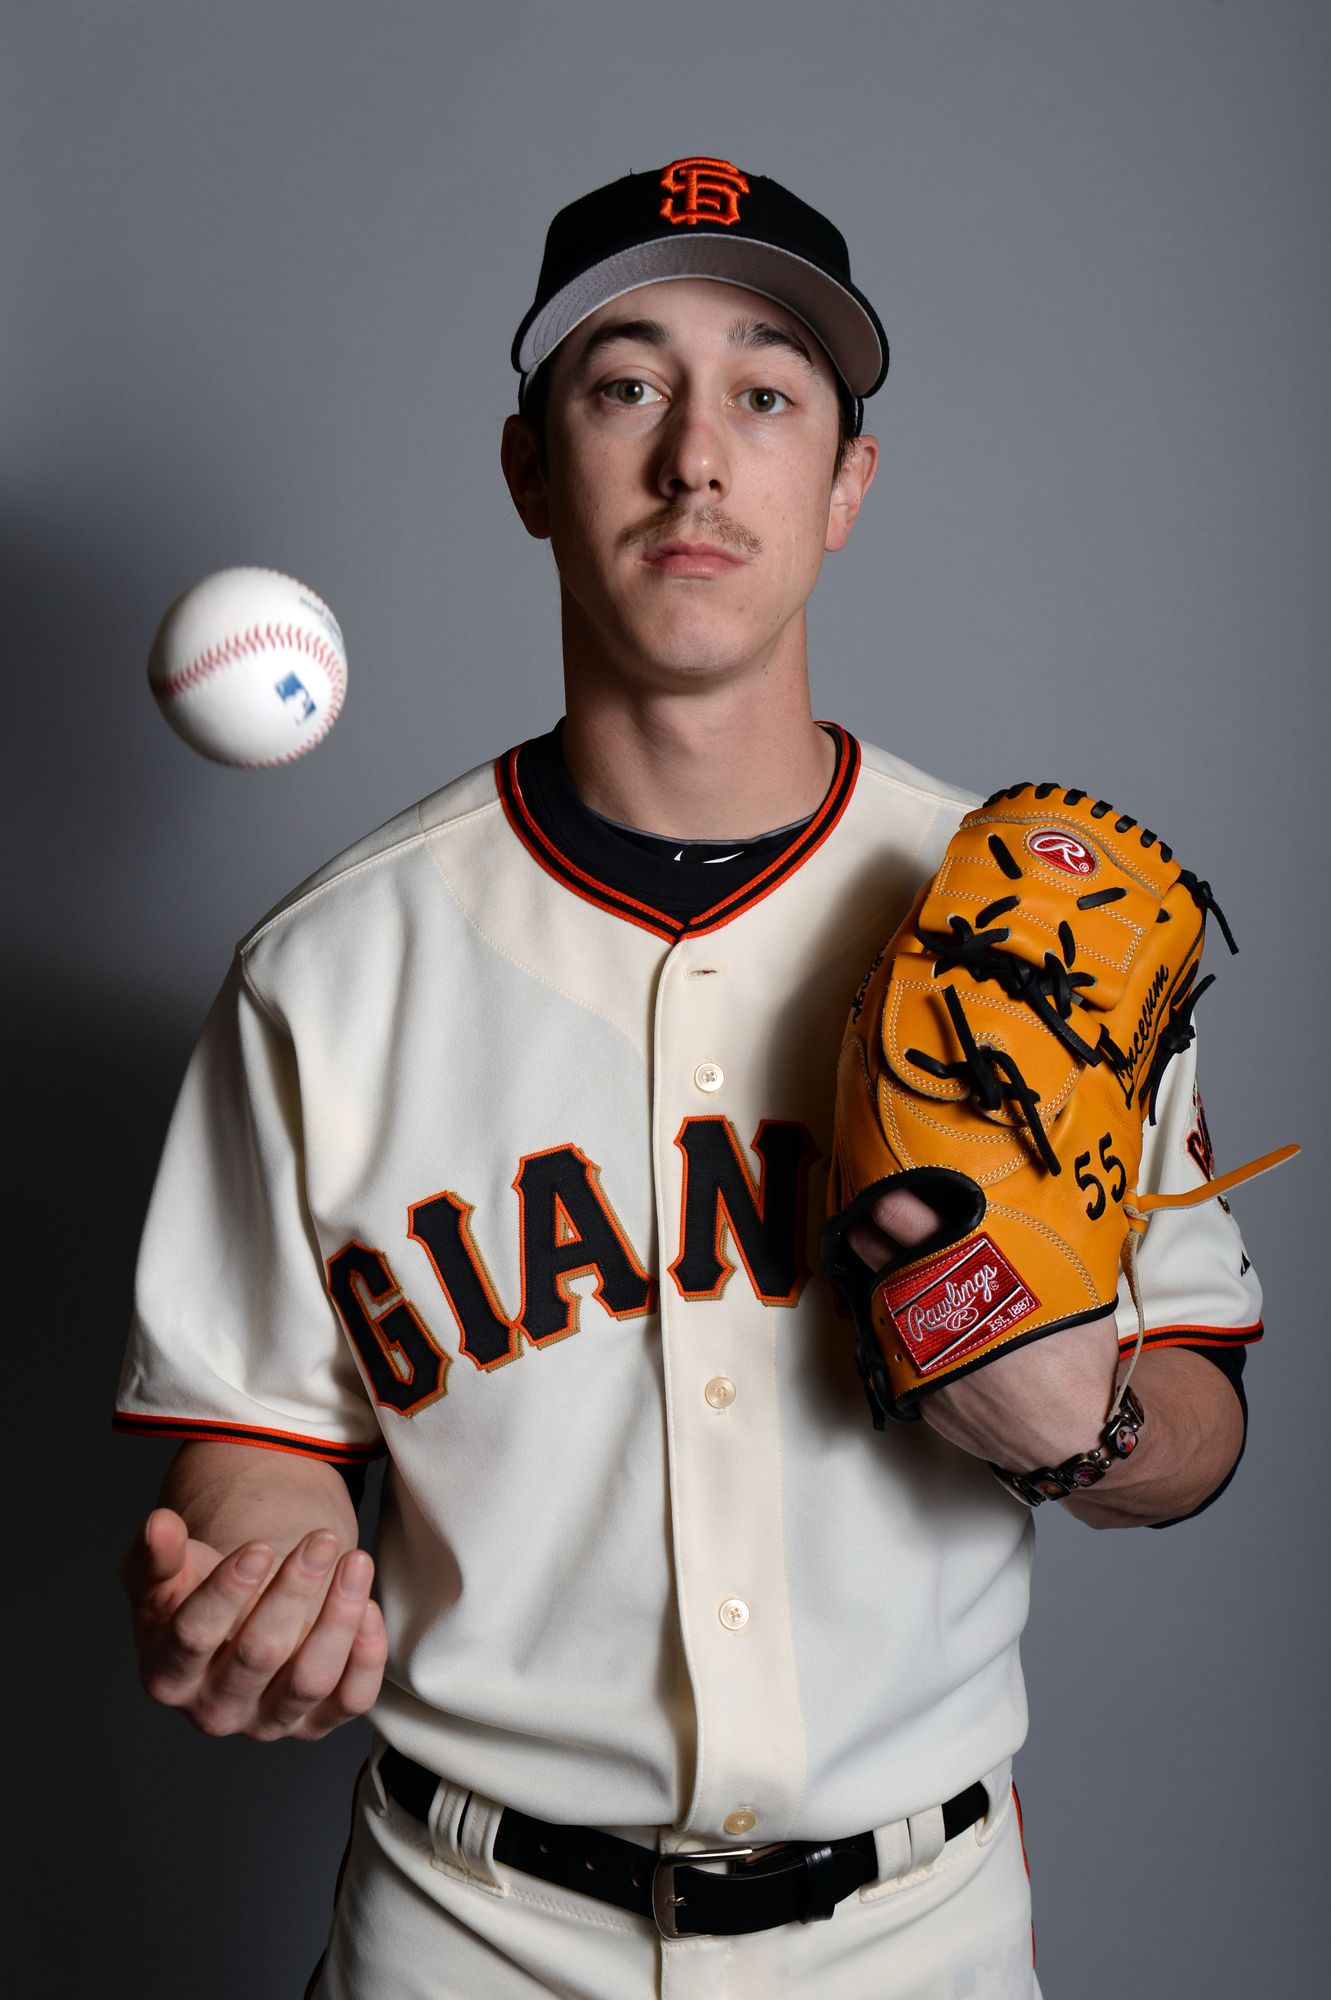 Will the San Francisco Giants' Misuse of Tim Lincecum Cost Them